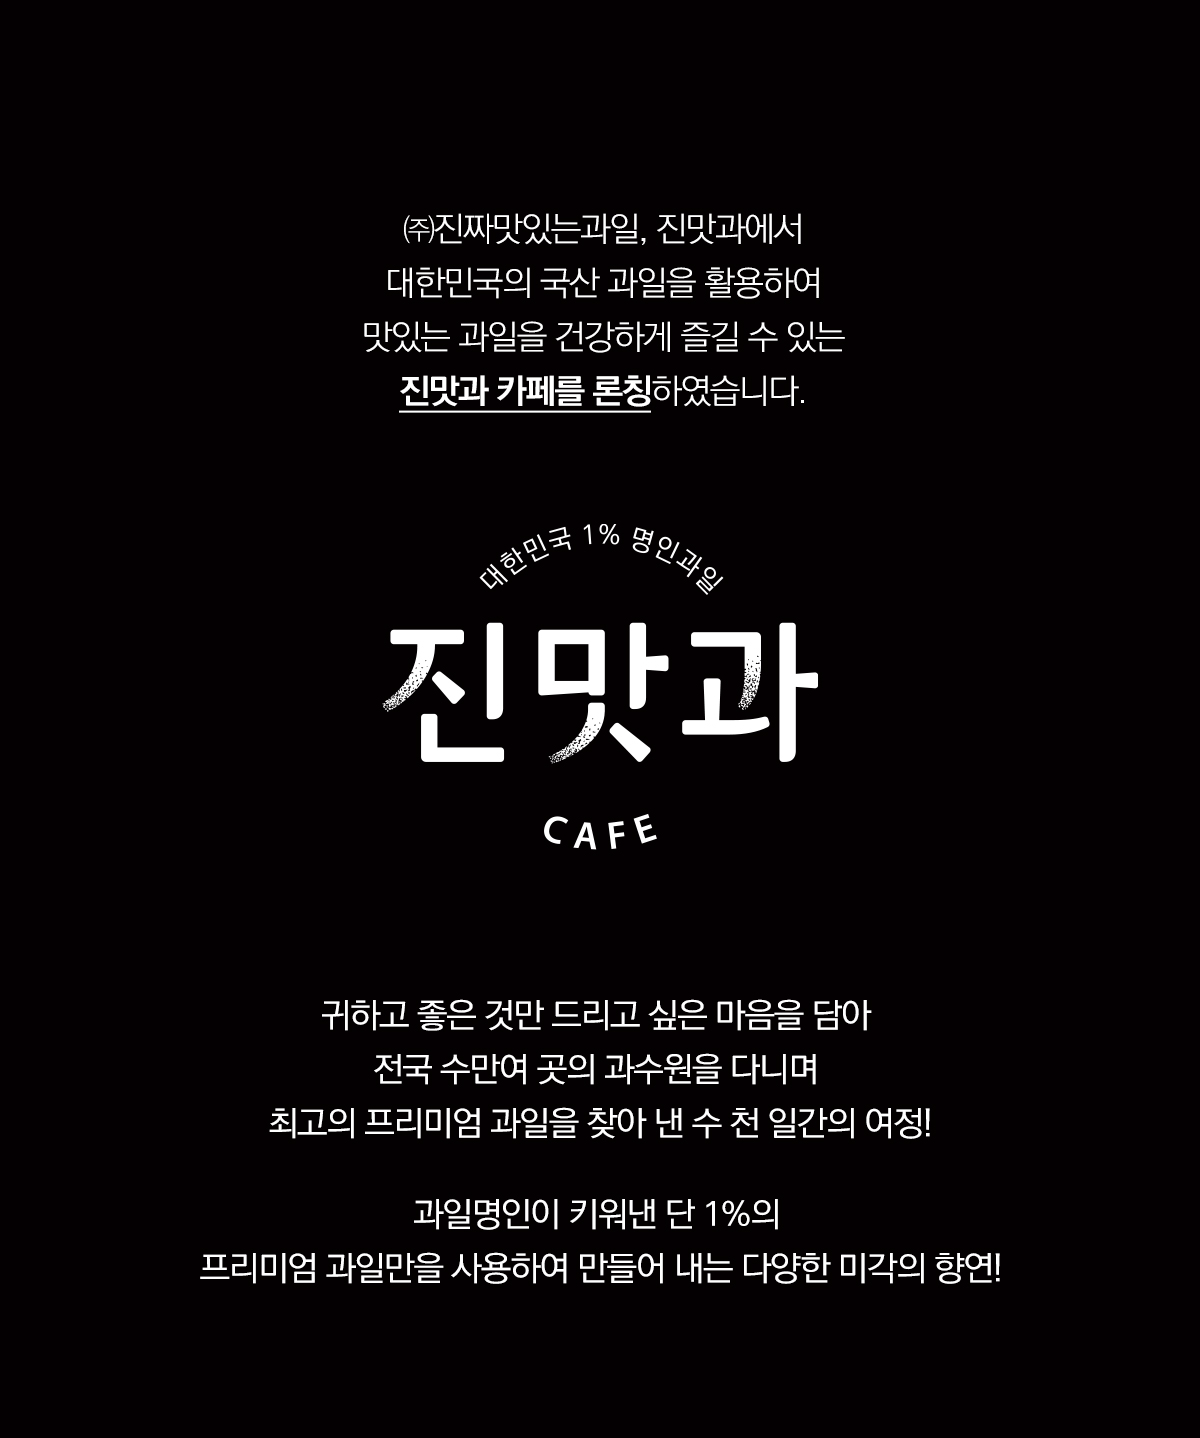 cafe_top_125035.png